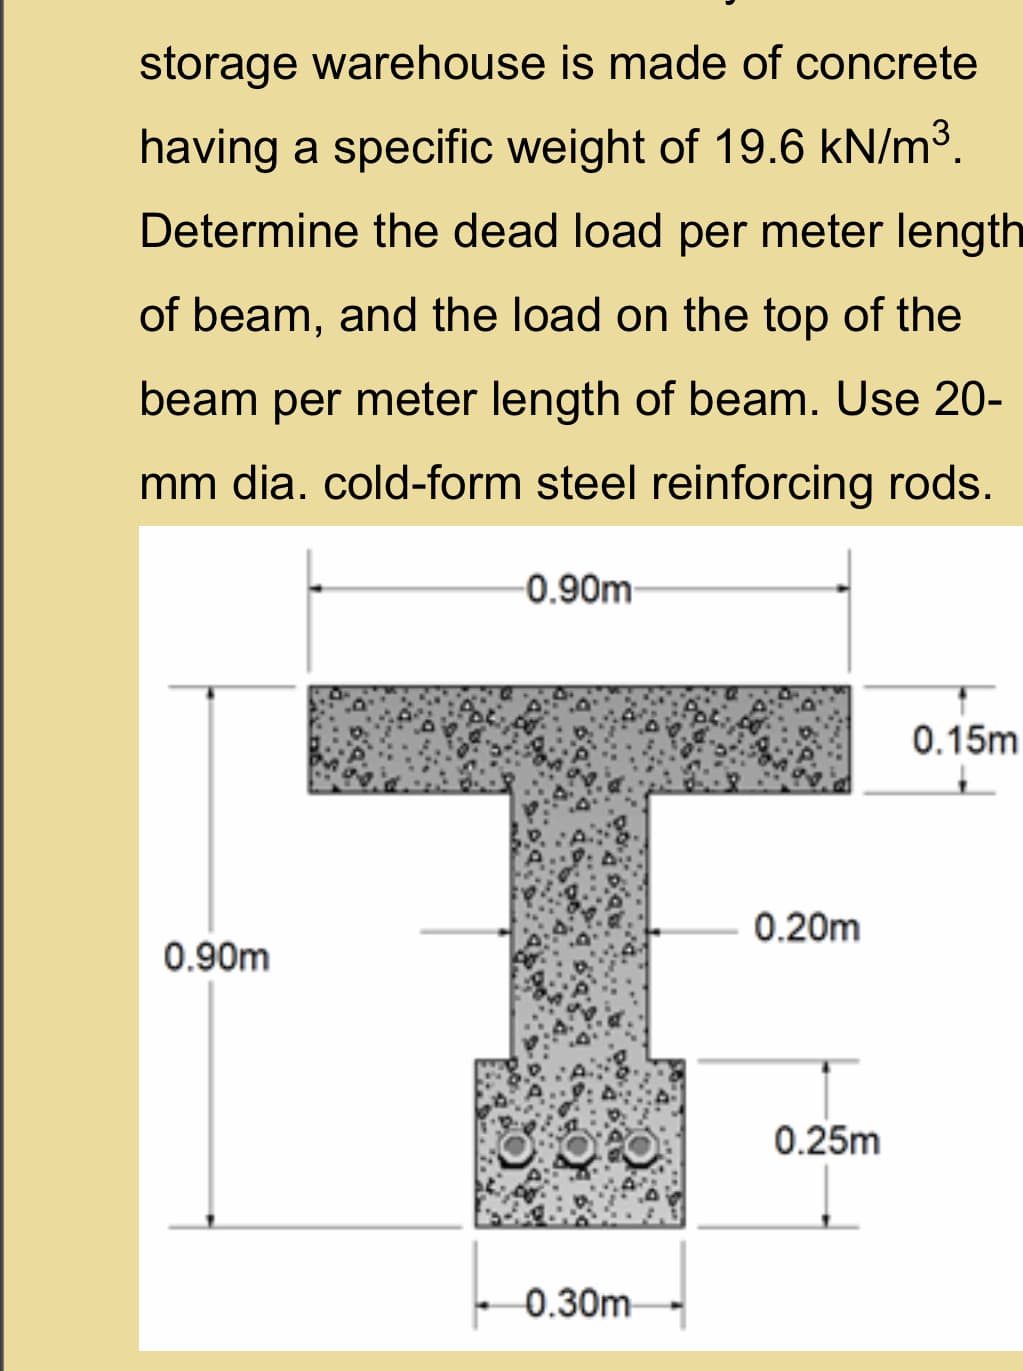 storage warehouse is made of concrete
having a specific weight of 19.6 kN/m³.
Determine the dead load per meter length
of beam, and the load on the top of the
beam per meter length of beam. Use 20-
mm dia. cold-form steel reinforcing rods.
-0.90m
0.15m
0.20m
0.90m
0.25m
0.30m
